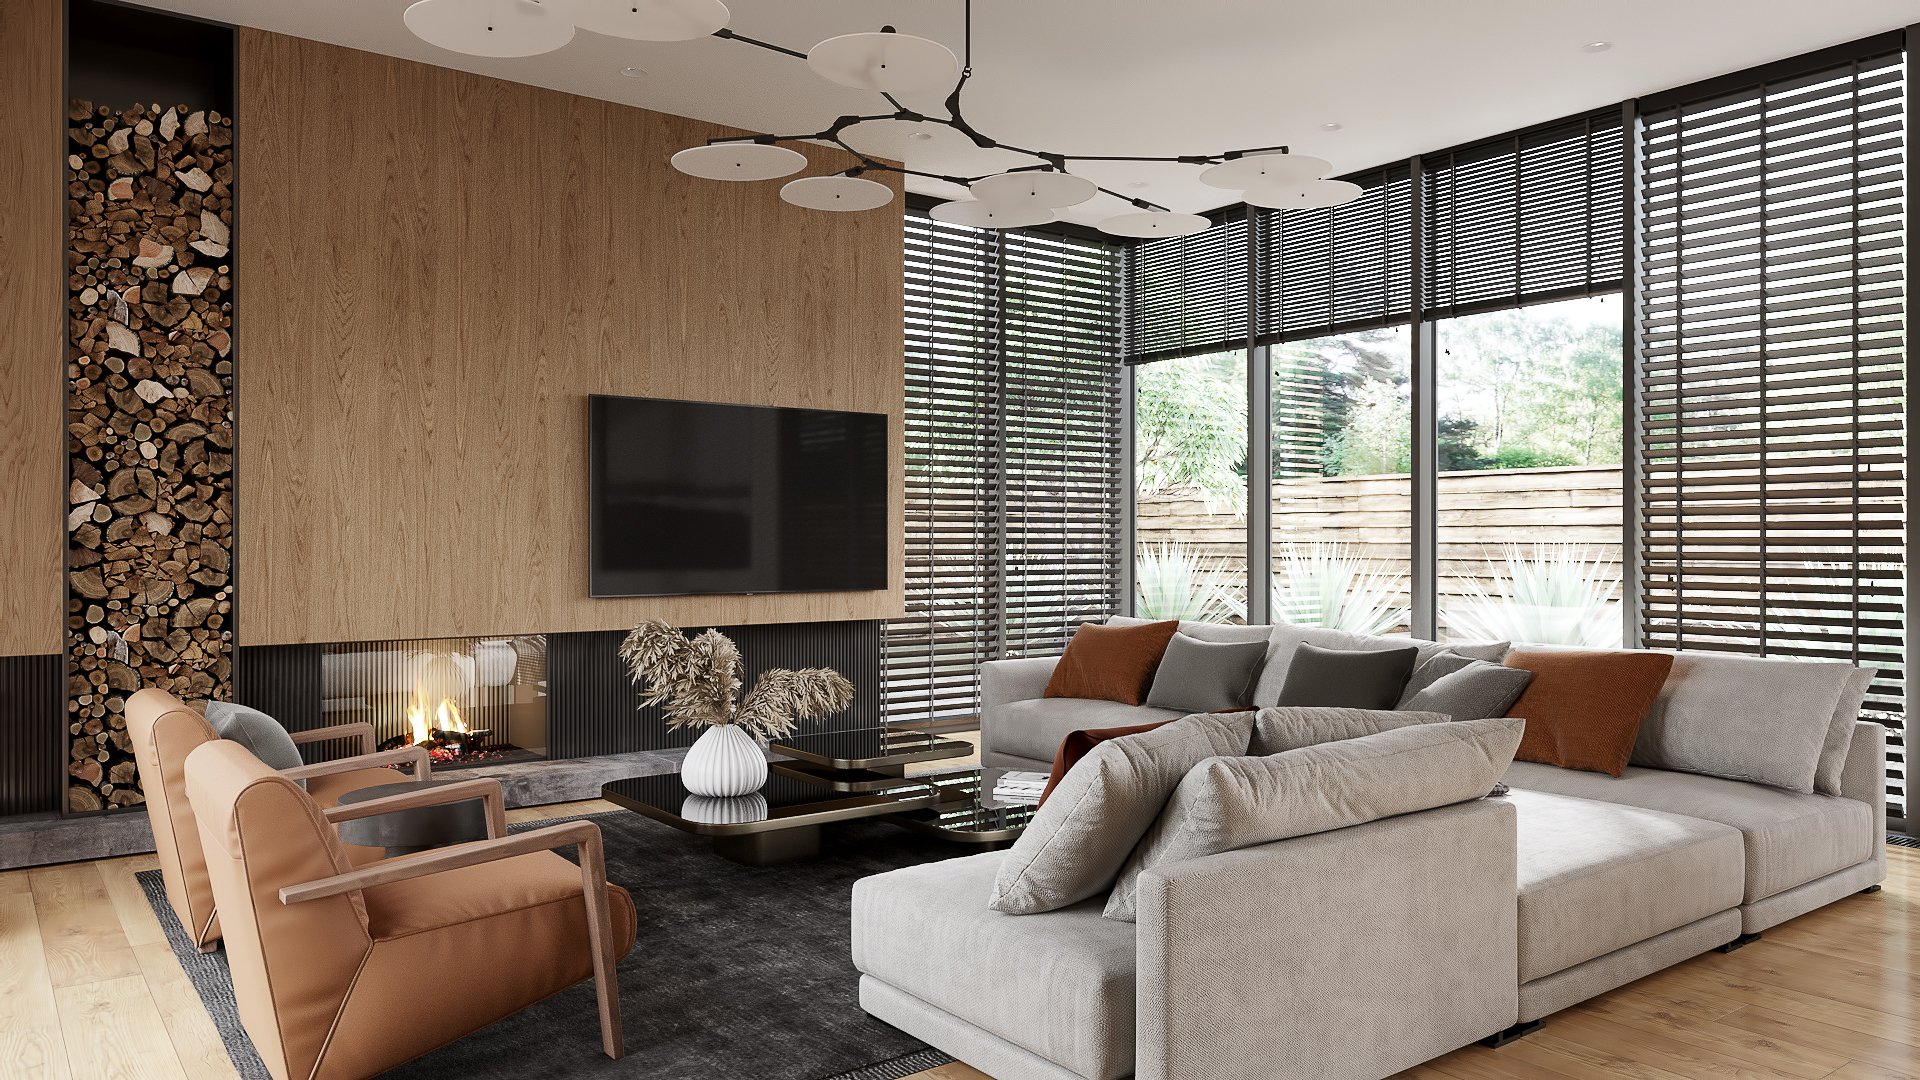 3D Interior Visualization of a Living Room in a Rural House